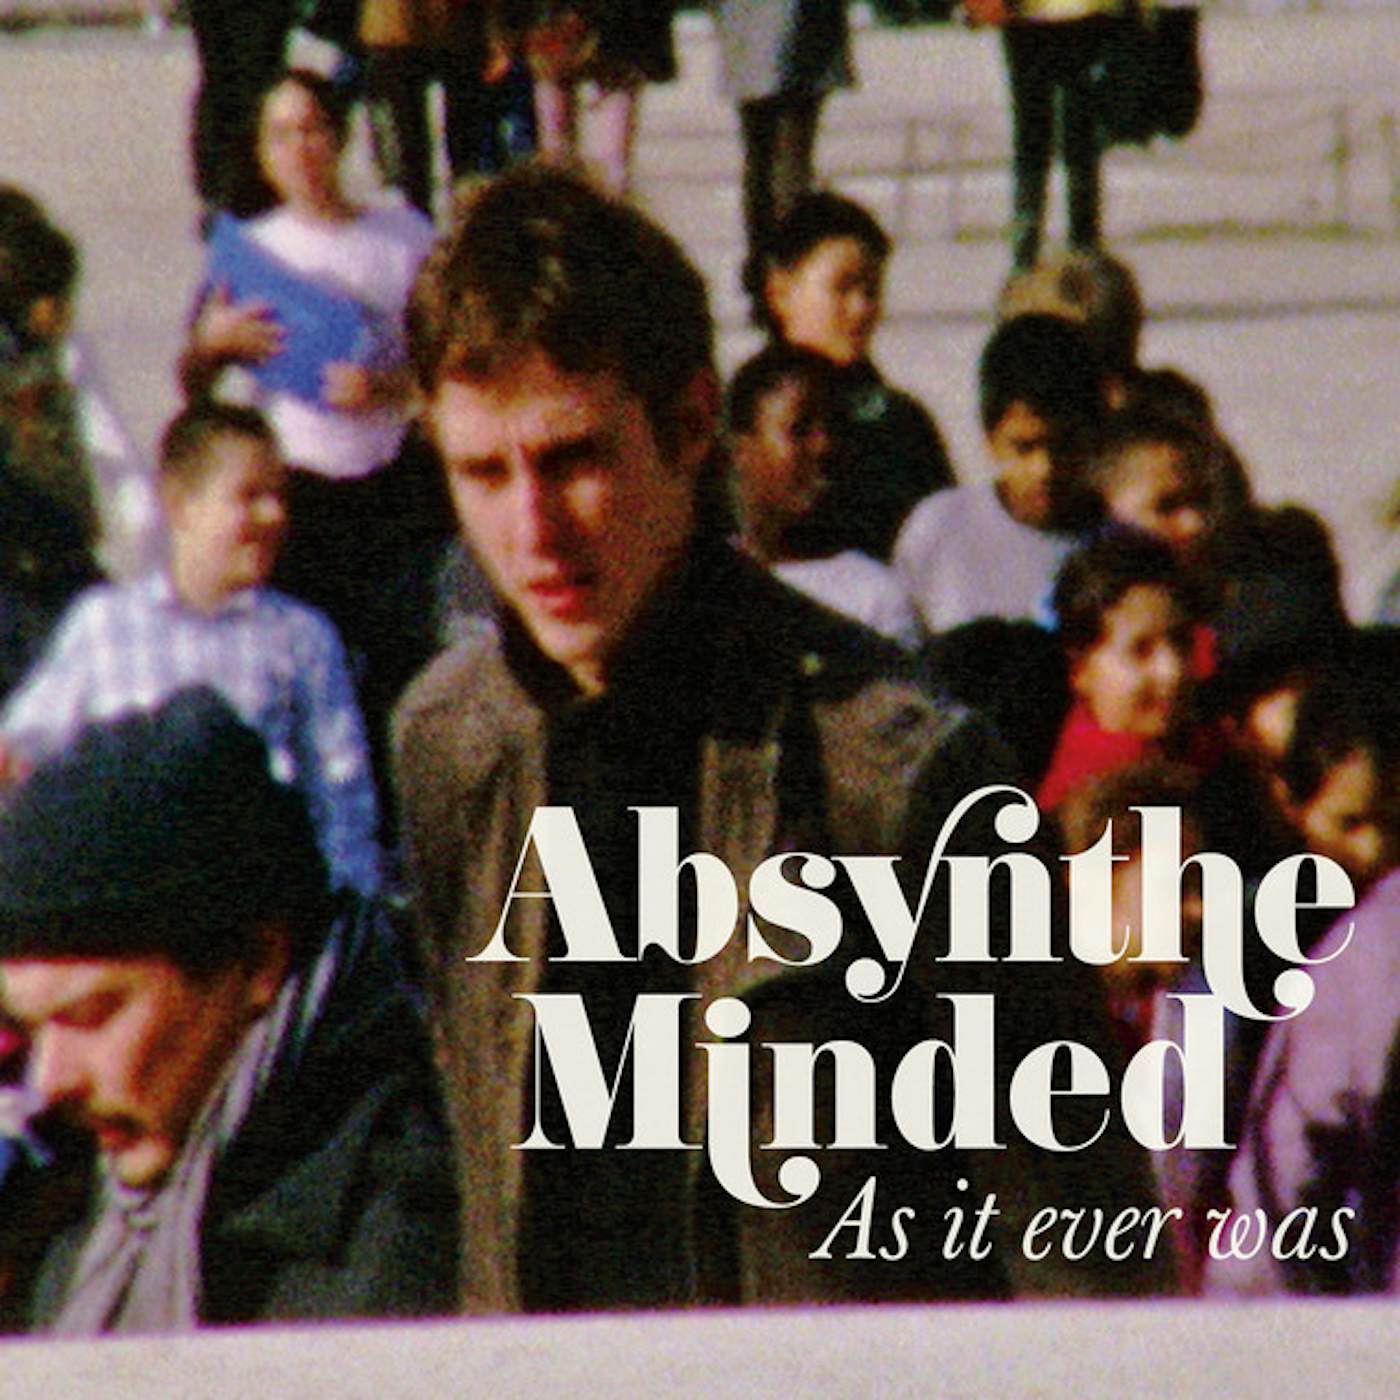 Absynthe Minded AS IT EVER WAS CD